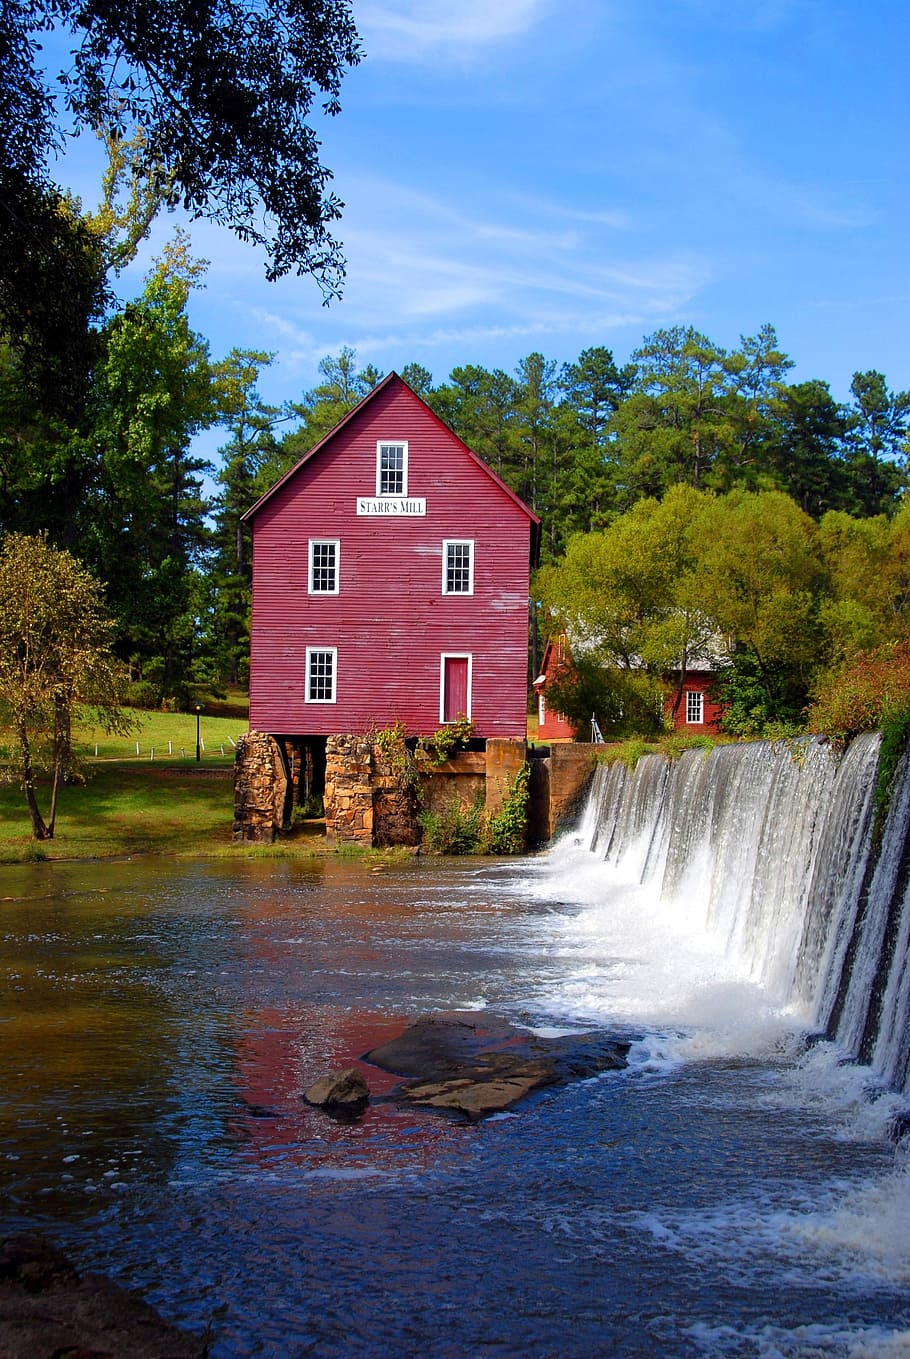 red, wooden, 2-story, 2- story house, river, daytime, starr's mill, georgia, usa, nature